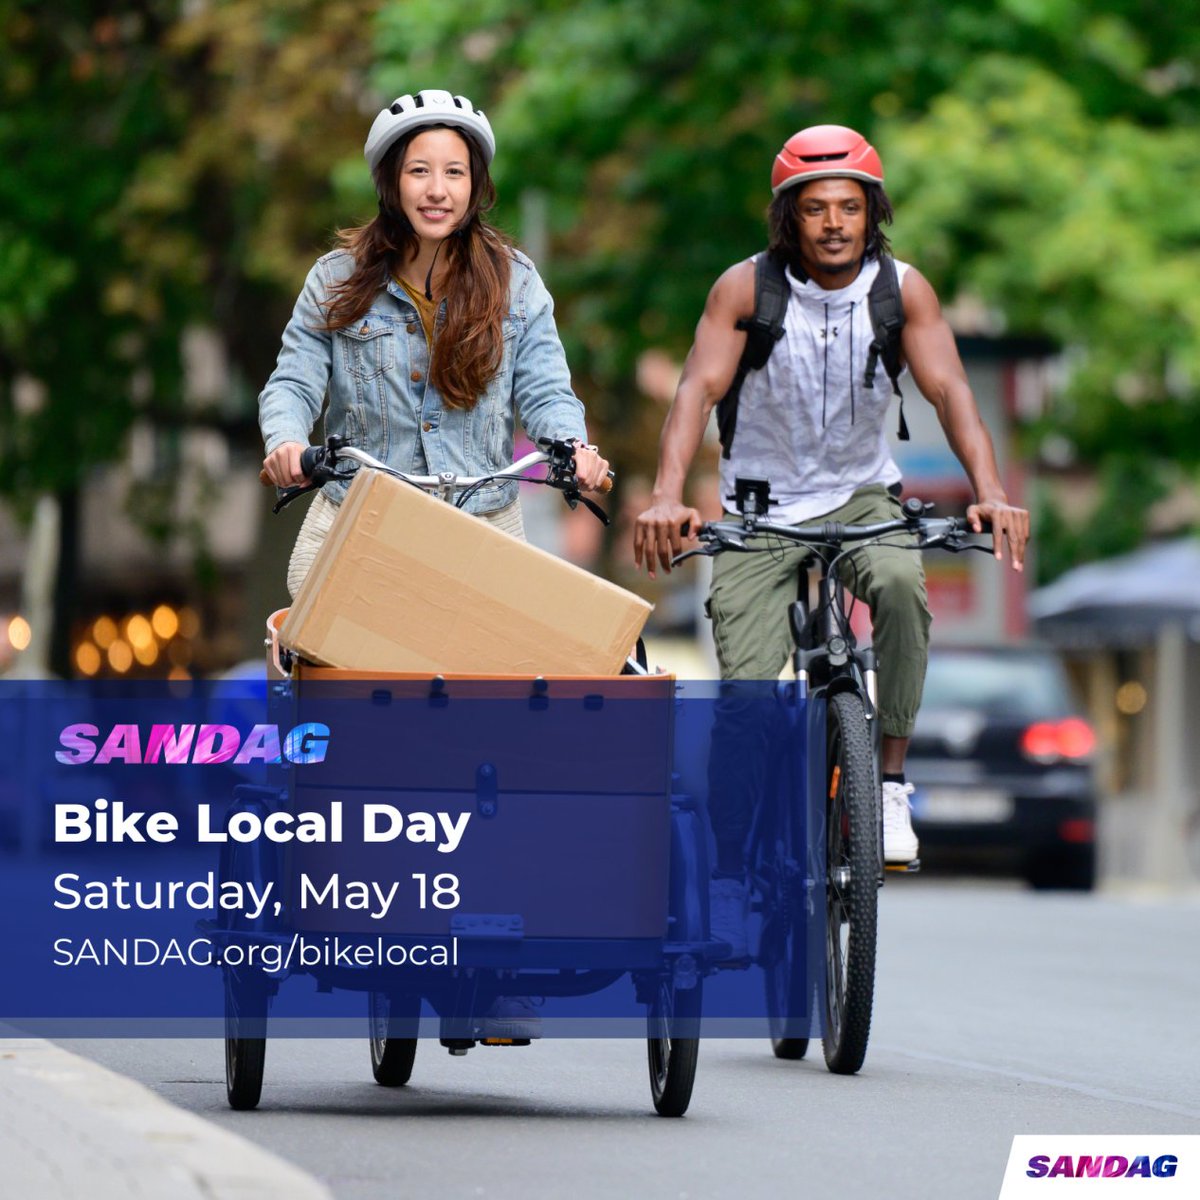 Keep the fun of Bike Anywhere Day rolling by joining us for our first ever Bike Local Day on Saturday, May 18. Check out special offers from participating local businesses at SANDAG.org/bikelocal. 🚴💨  #BikeAnywhereSD #SANDAG